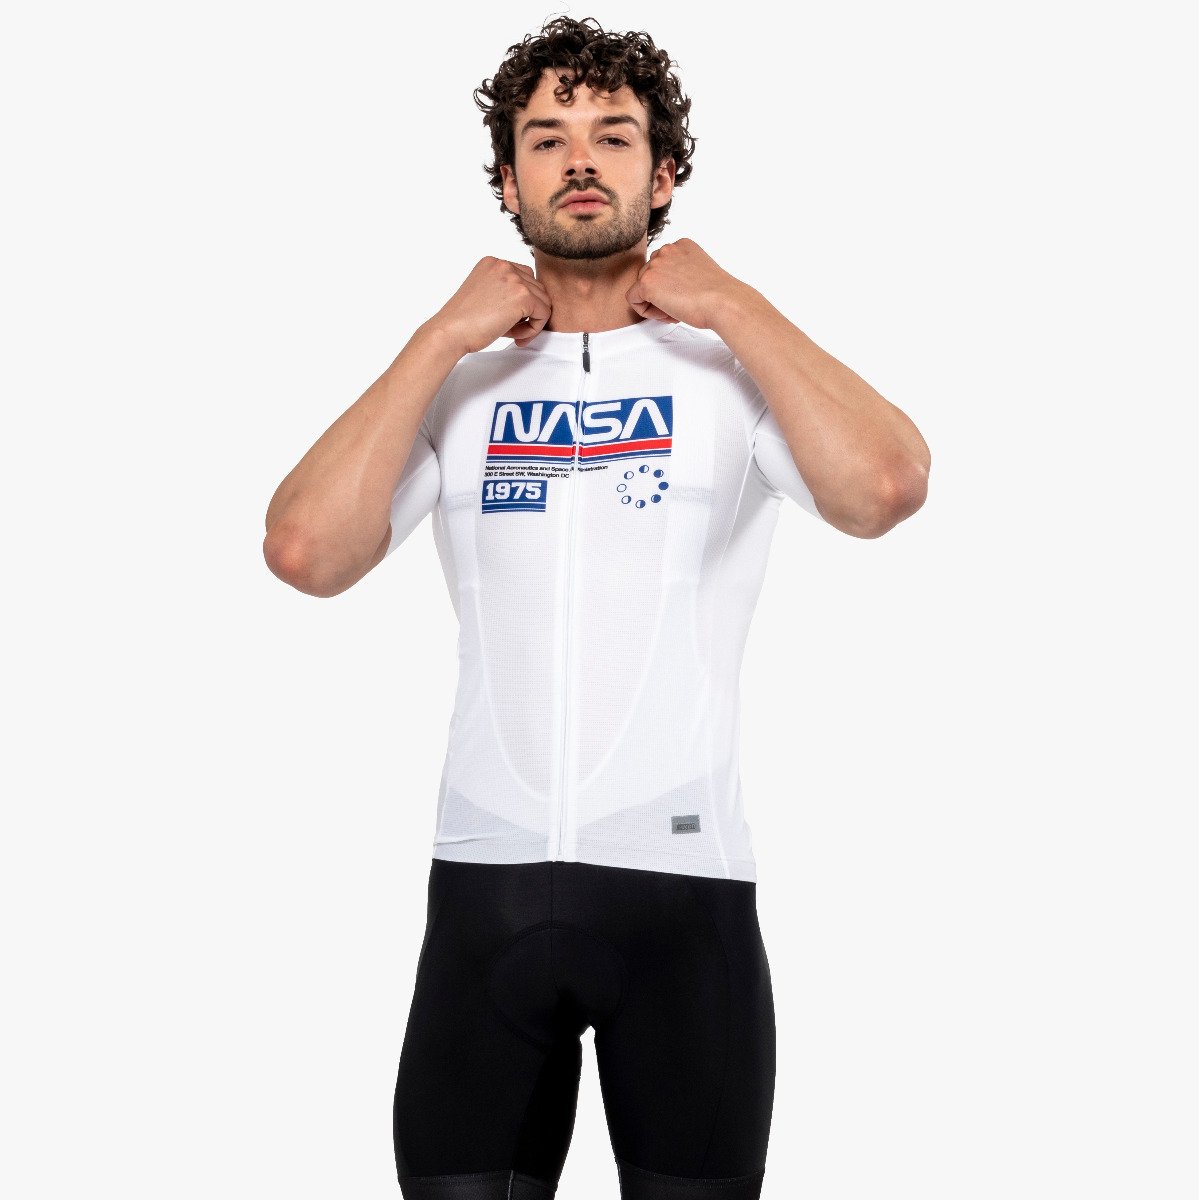 MAILLOT DE CICLISMO X-OVER - SPACE AGENCY 06